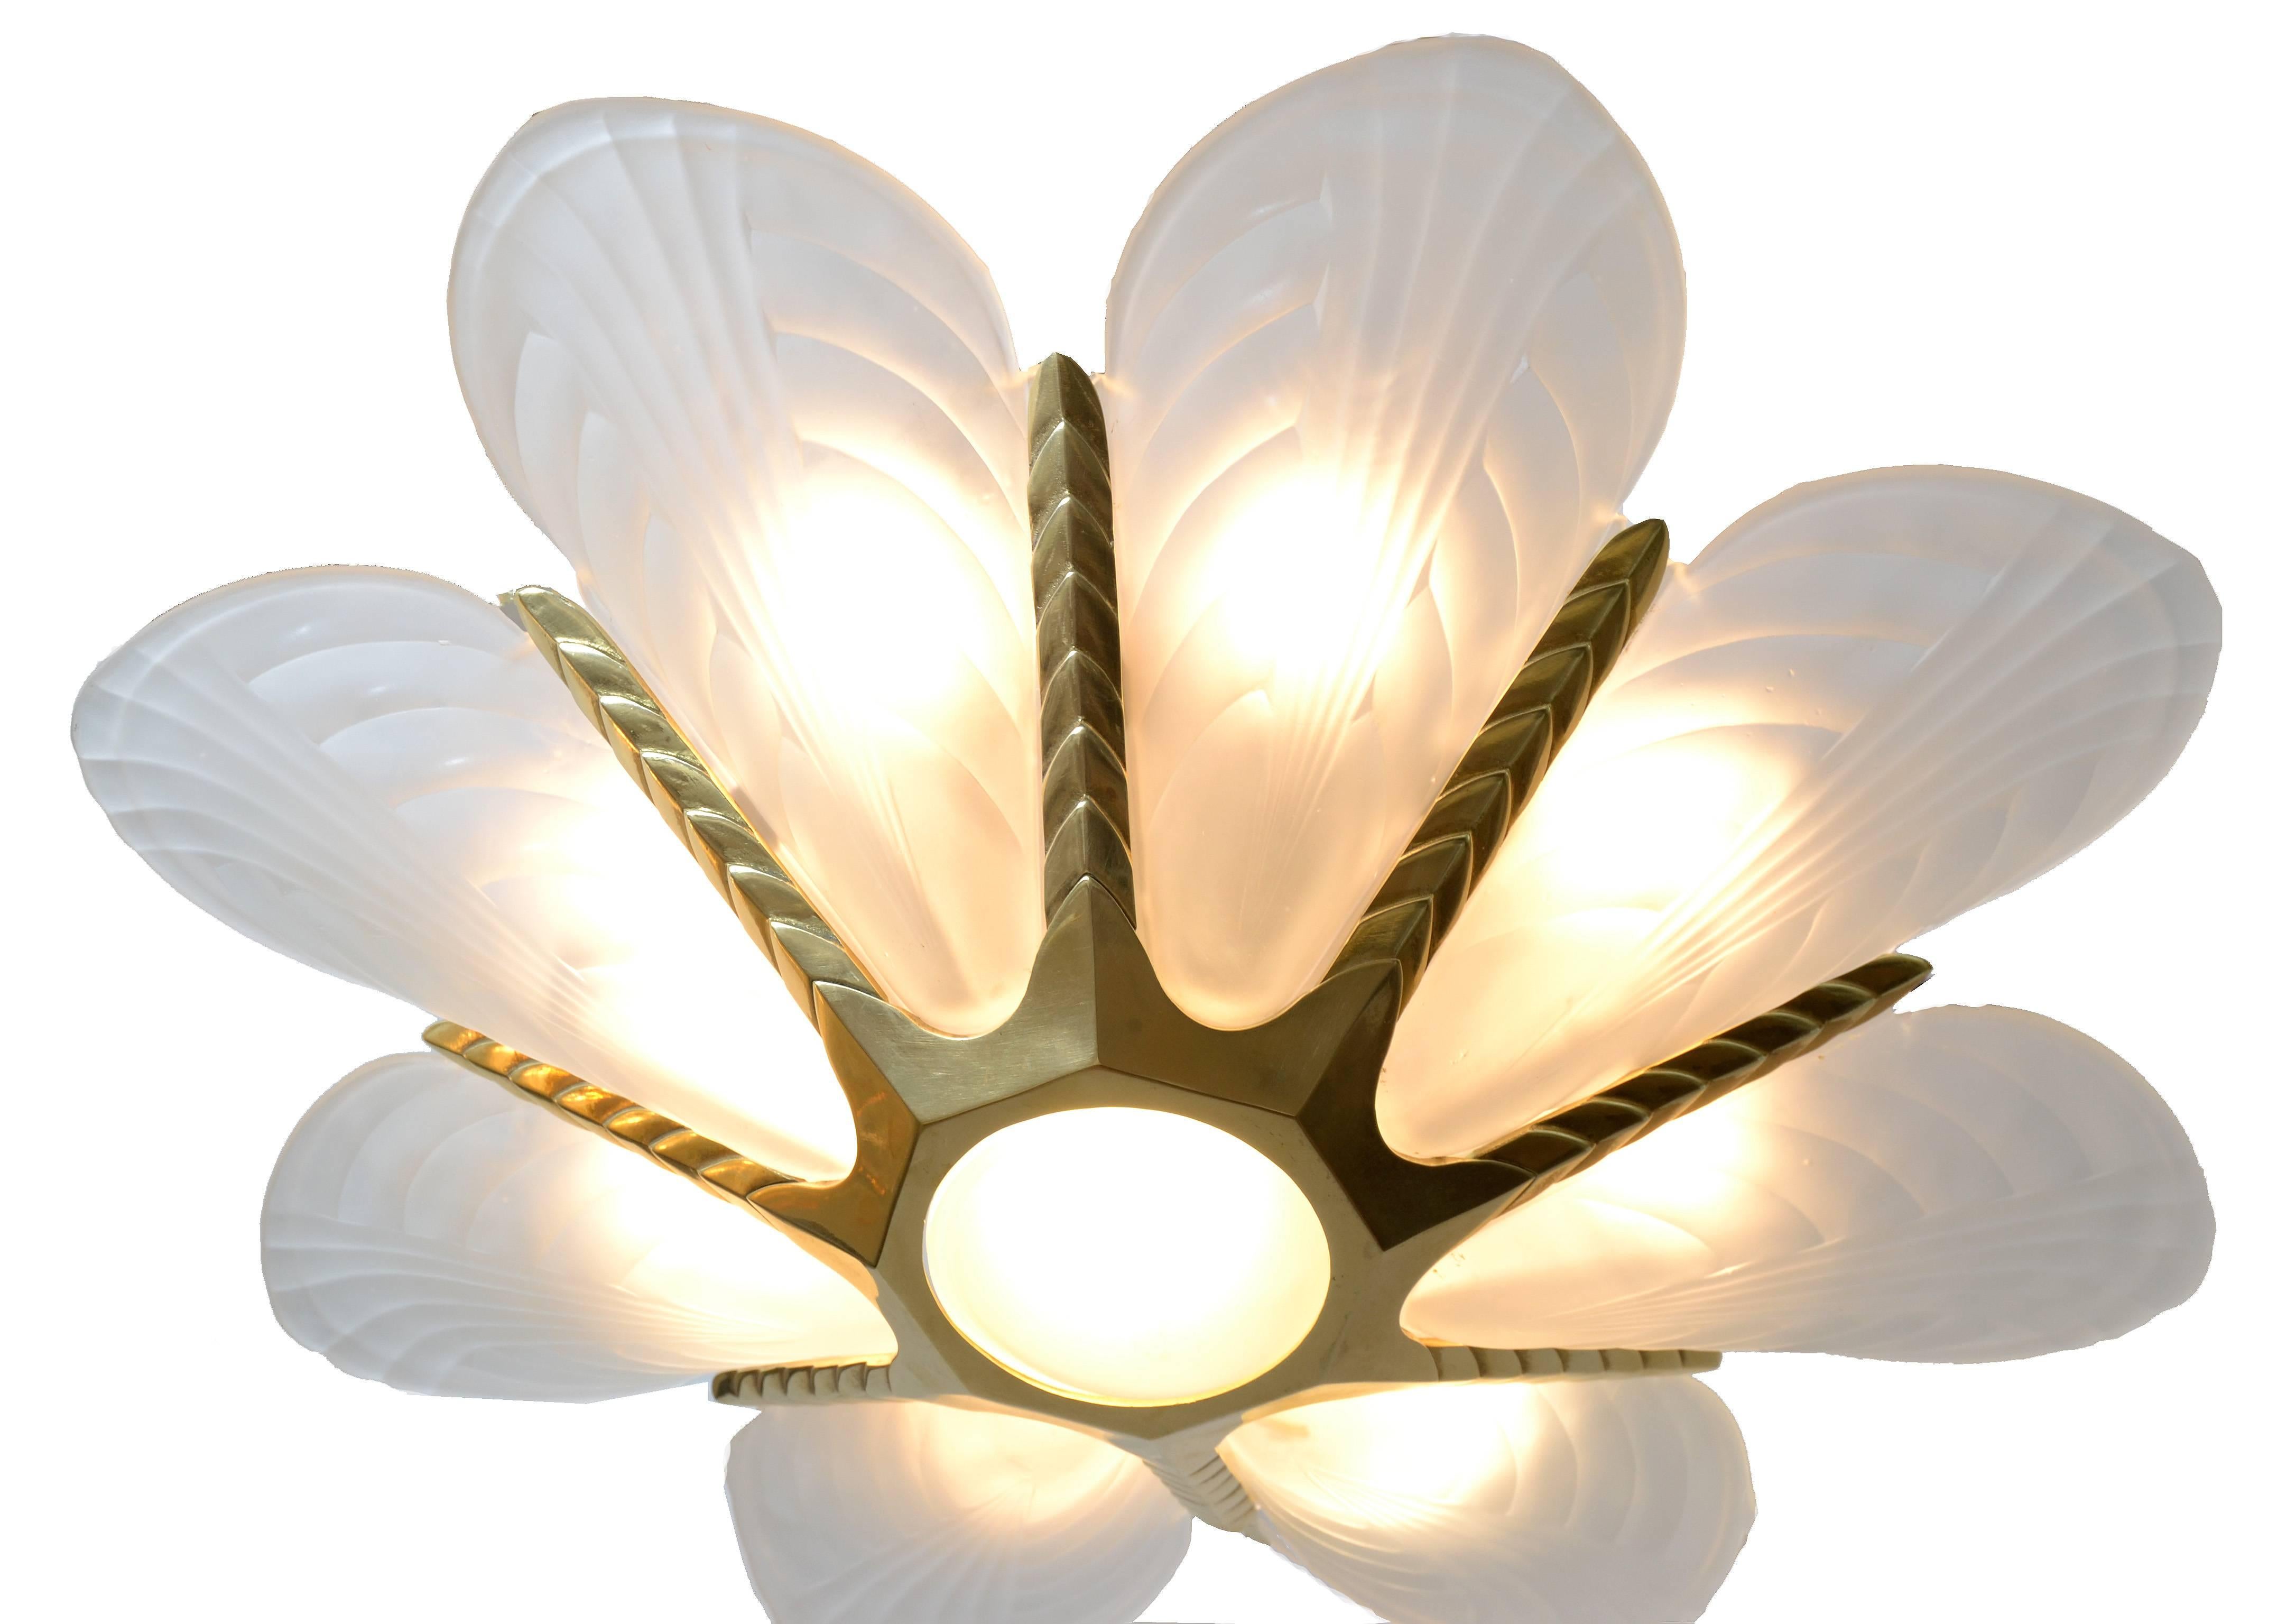 French brass Art Deco glass slip shade chandelier.
The brass core has wheat sheaf motif.
The chandelier is in perfect working condition and uses eight-light bulbs with max. 40 watts.
Canopy included and the length of the chain is 22.5 inches,